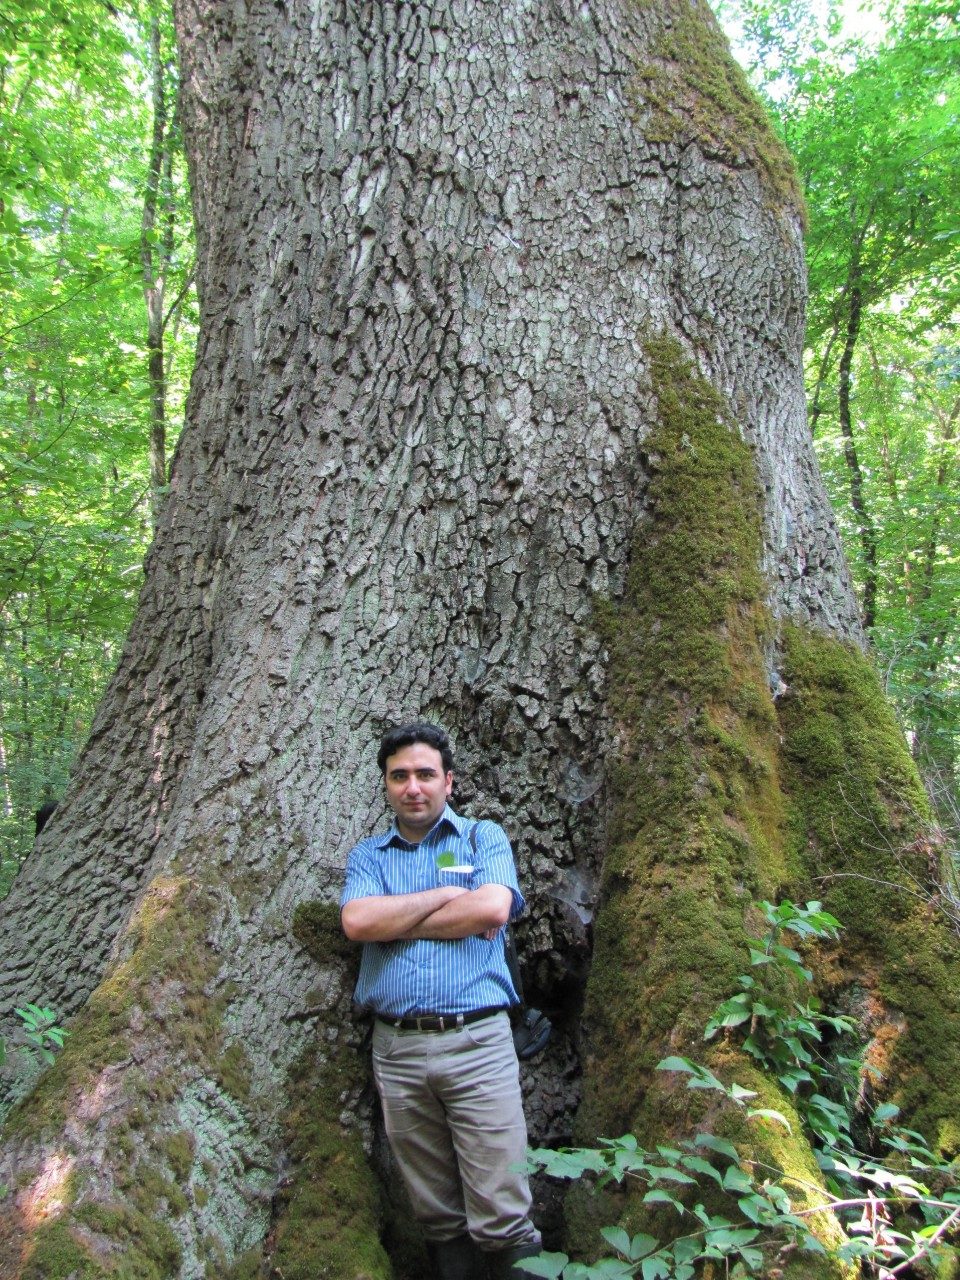 Kiomars Sefidi stands in front of an enormous old-growth tree in Iran’s Kheyrud Experimental Forest. Image courtesy of Kiomars Sefidi.